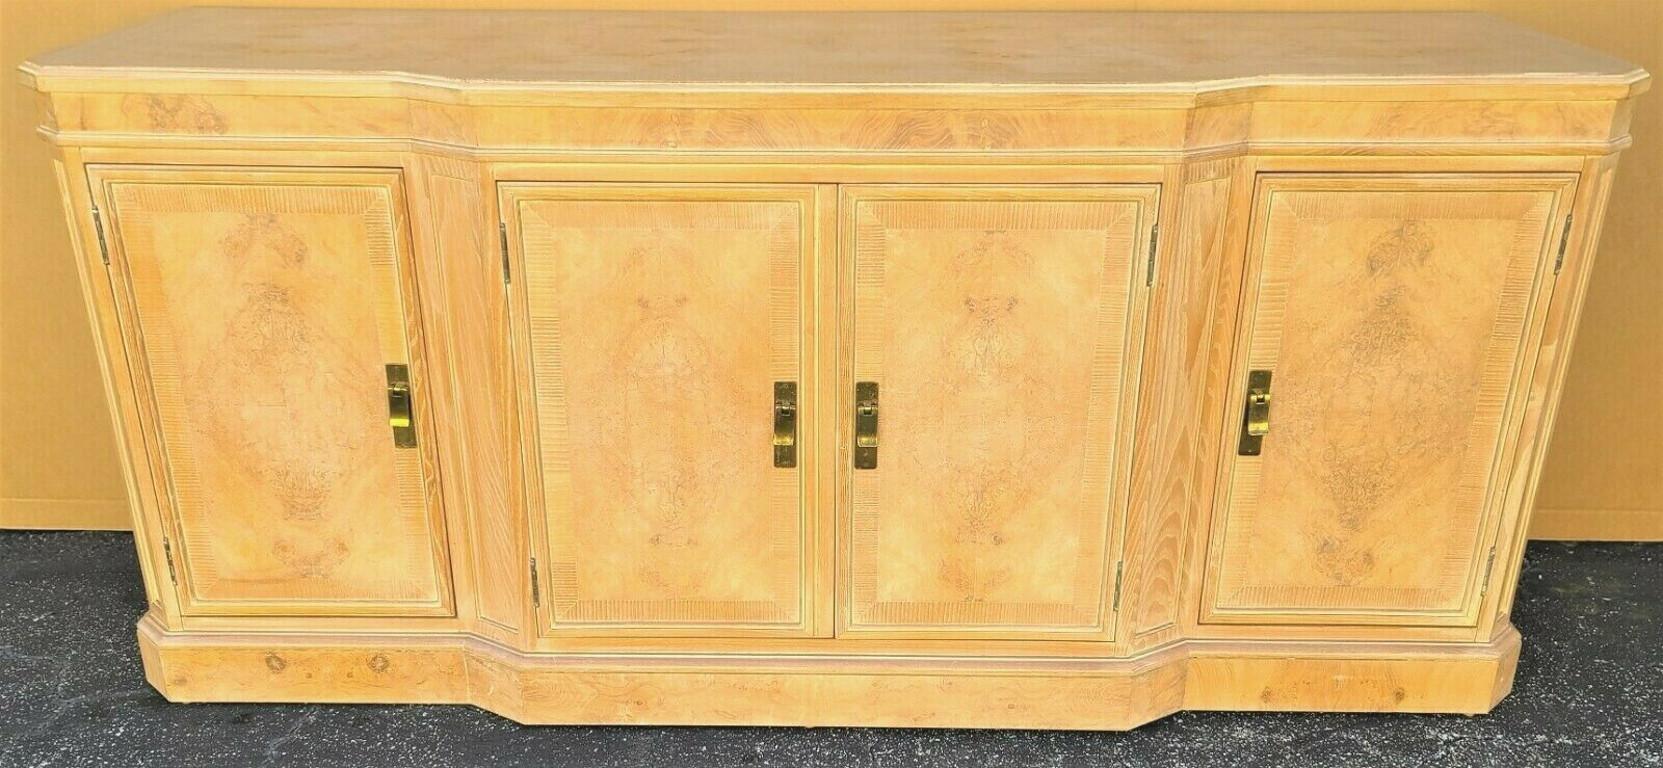 Heritage Corinthian Collection Blonde Light Burl Wood Credenza Sideboard Buffet
4 door cabinet with 2 shelves, 3 drawers, light burl wood finishes on the doors and top, and a tarnish-resistant felt-lined flatware top drawer. 

Coloration Report: